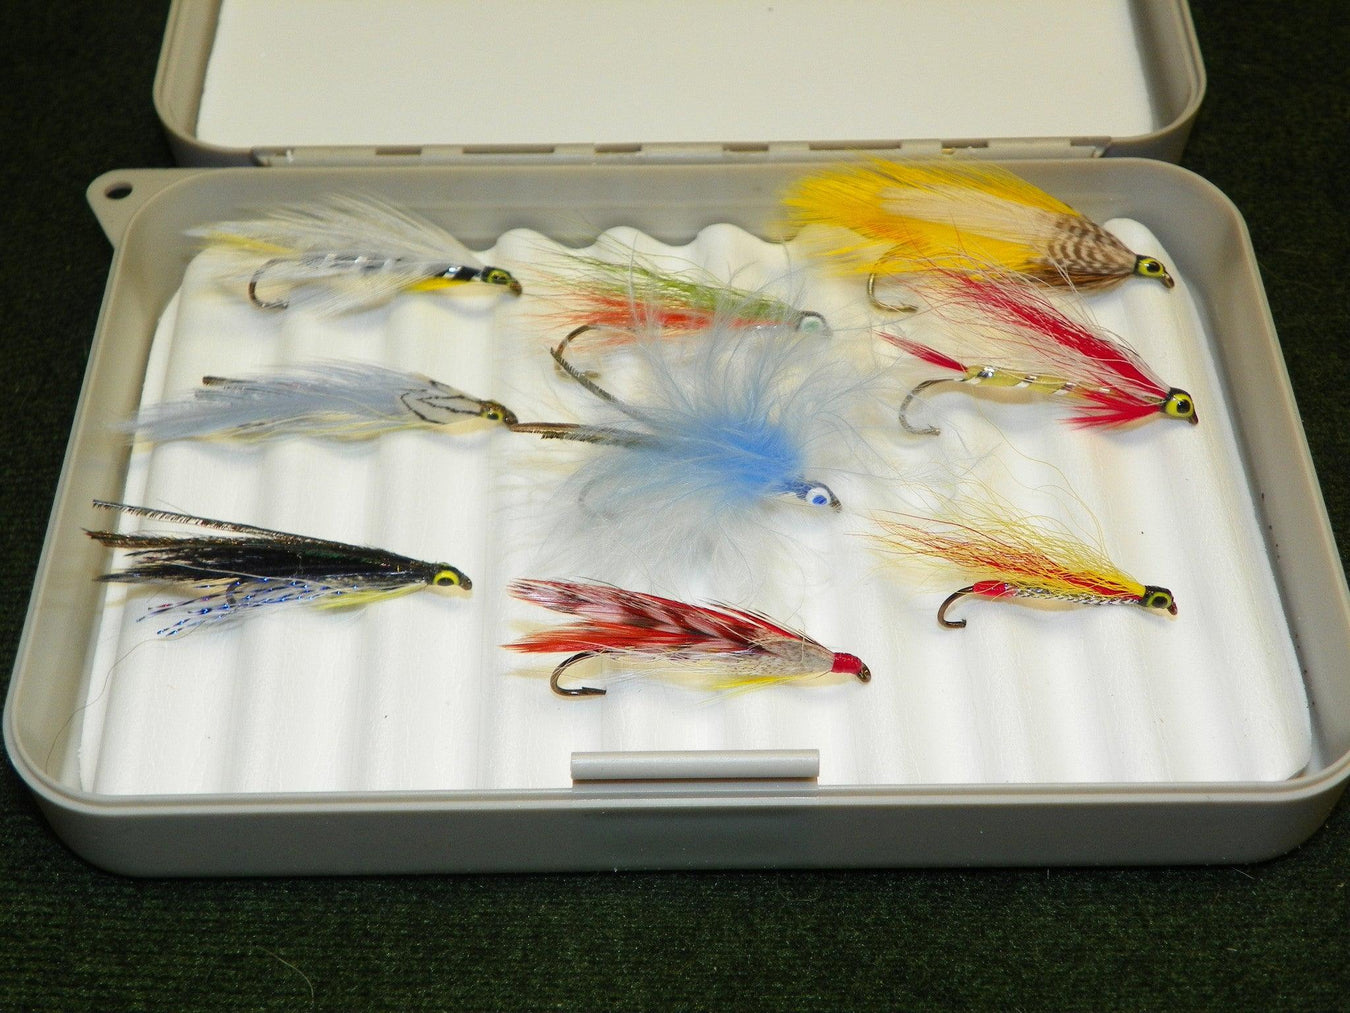 Fly Collections - Rangeley Region Sports Shop